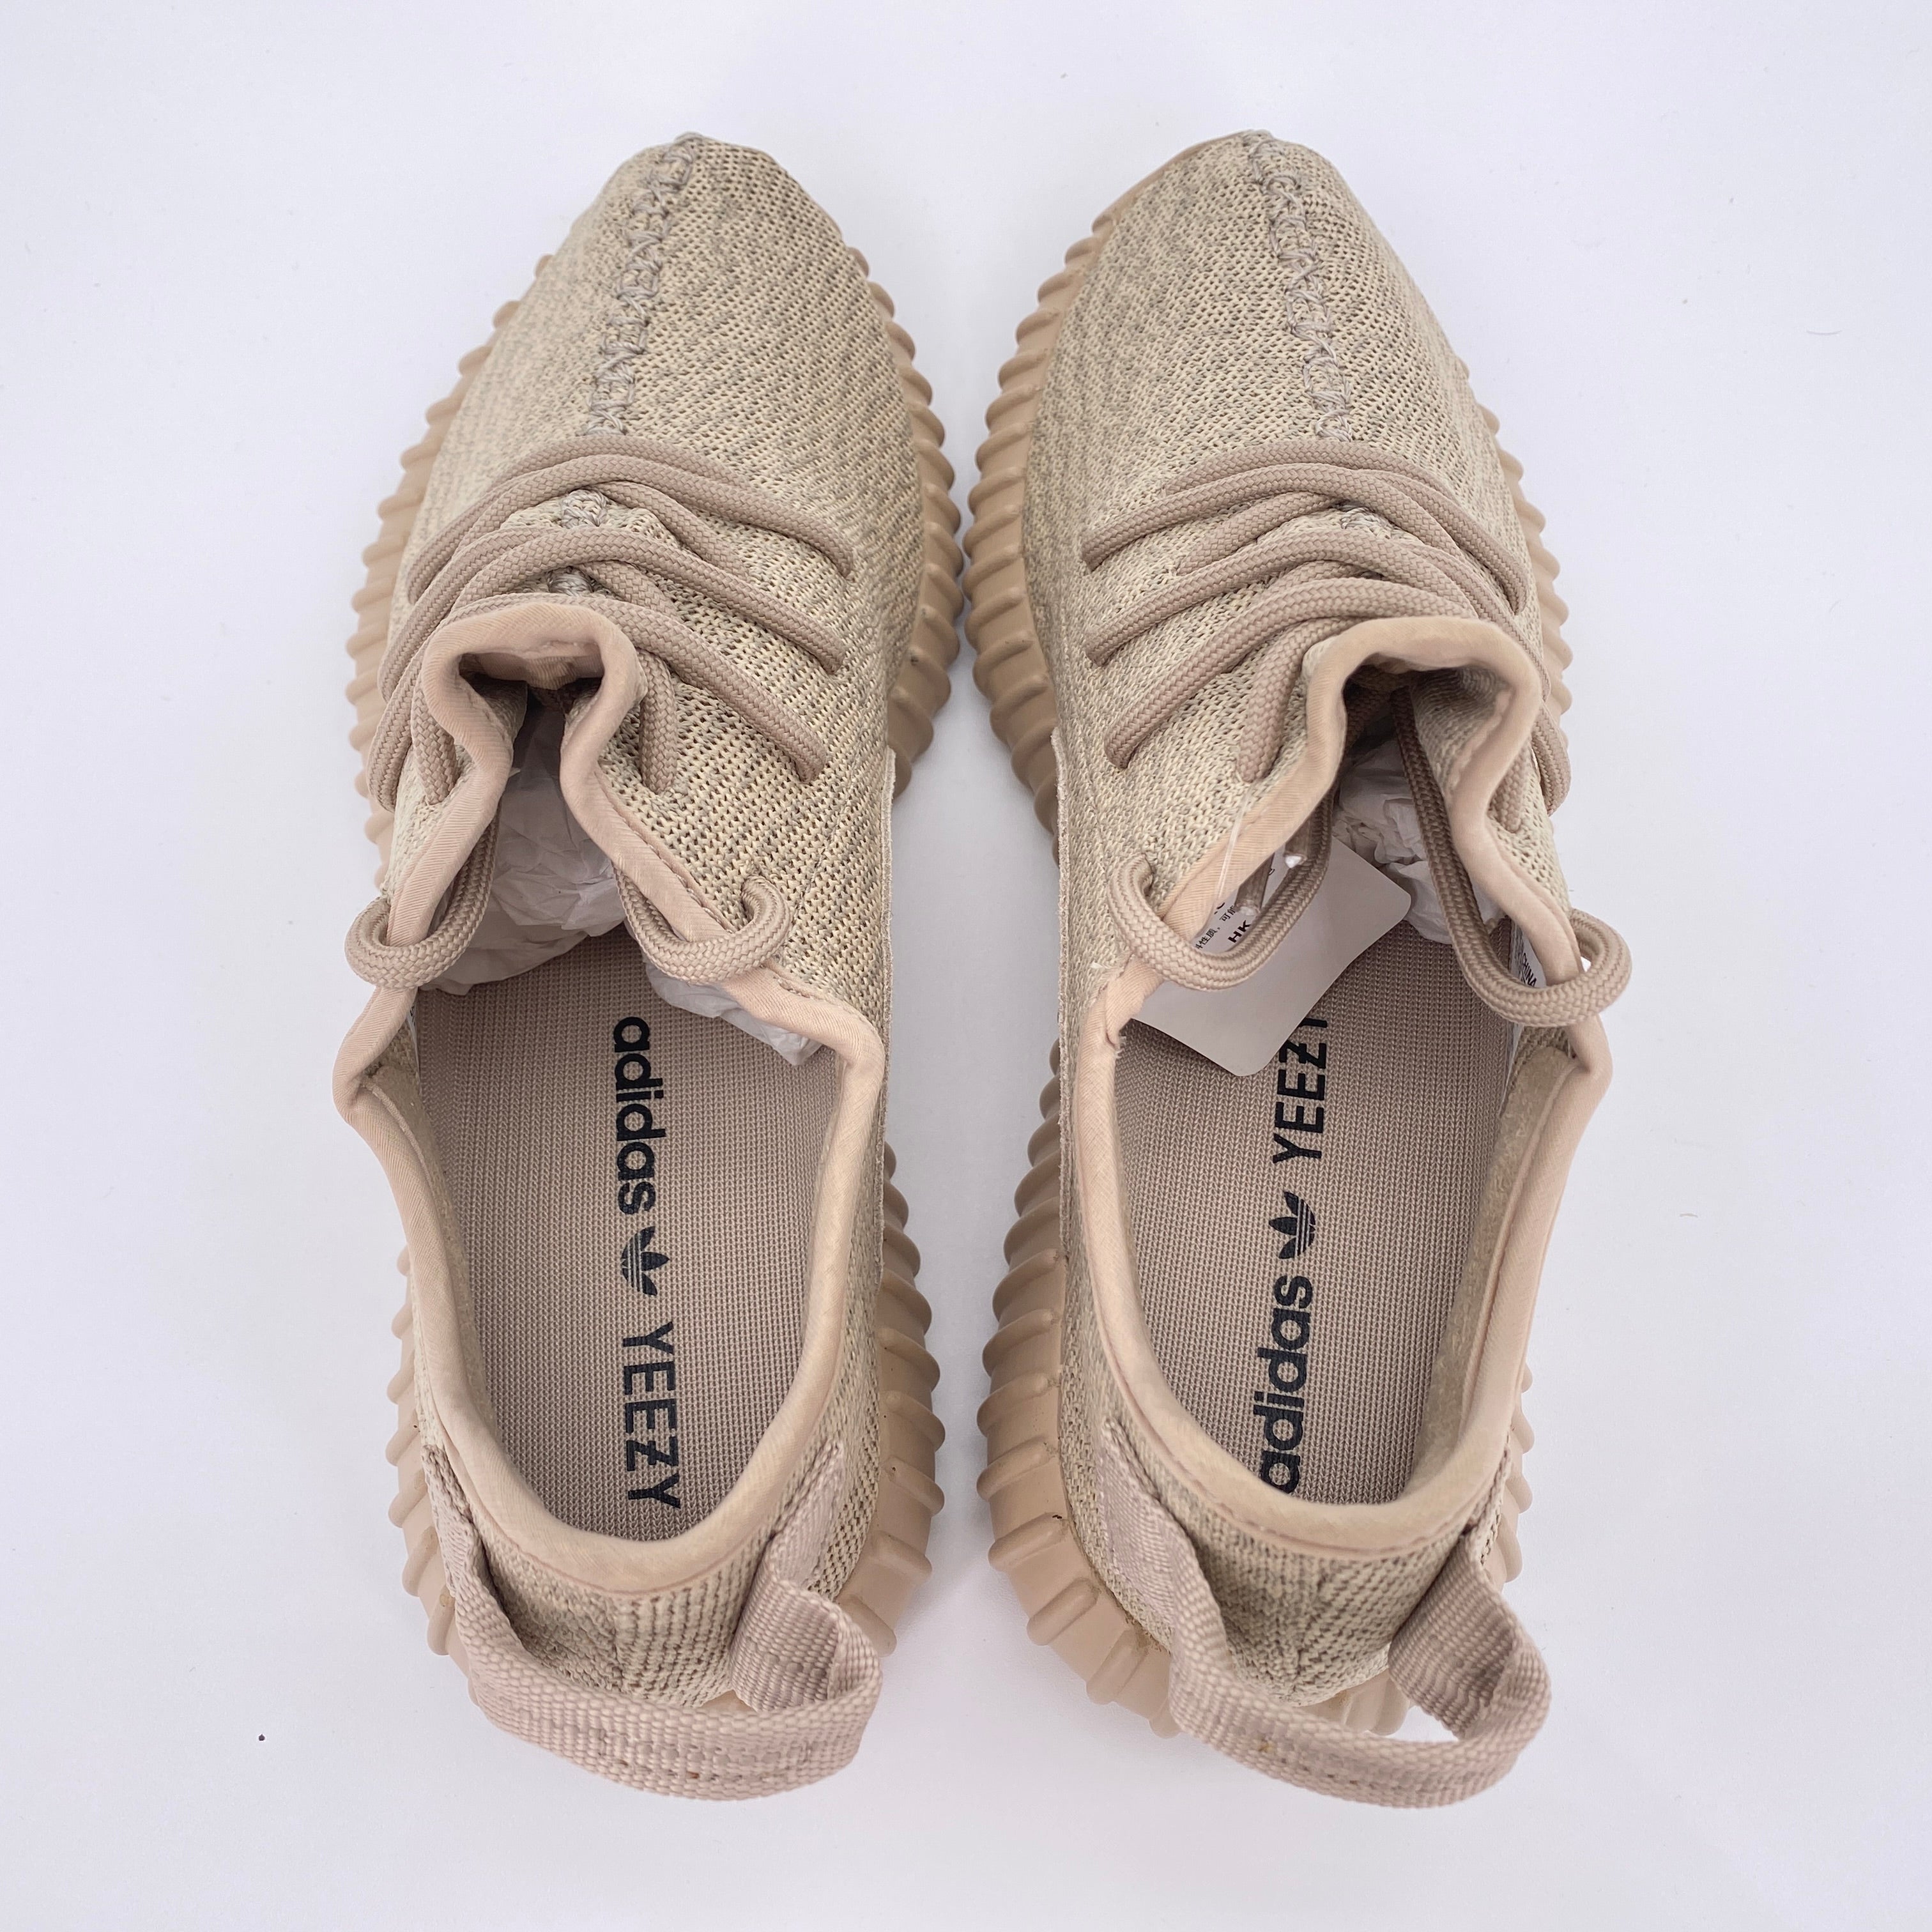 Yeezy 350 &quot;Oxford Tan&quot; 2015 New Size 7.5